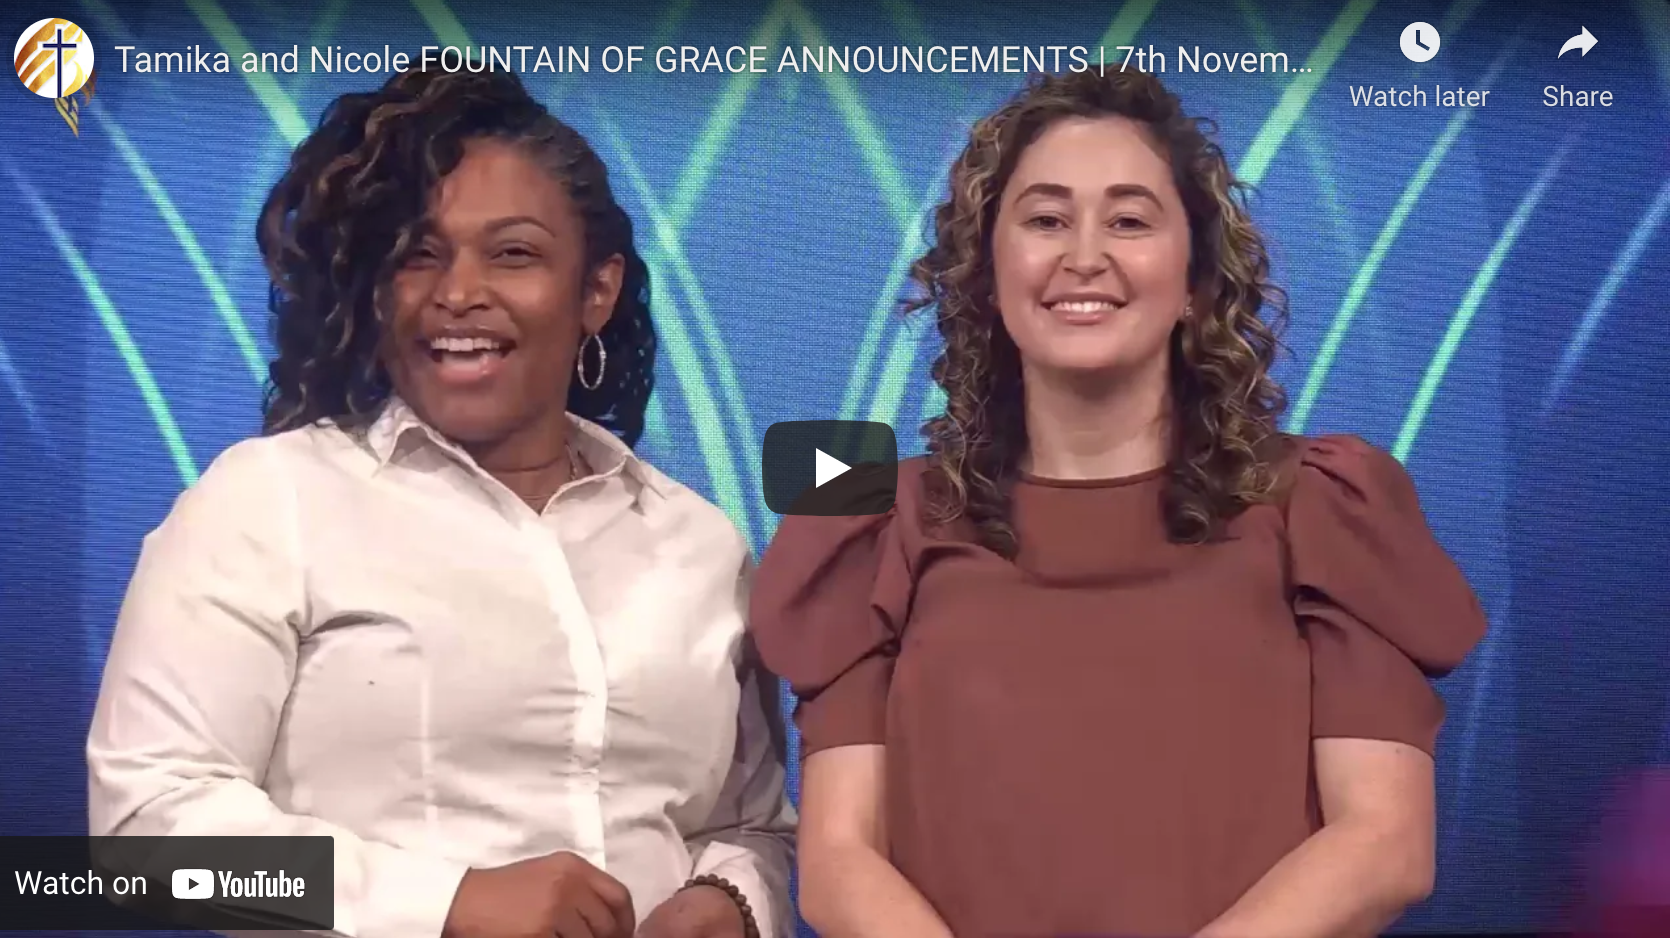 Tamika and Nicole FOUNTAIN OF GRACE ANNOUNCEMENTS | 7th November